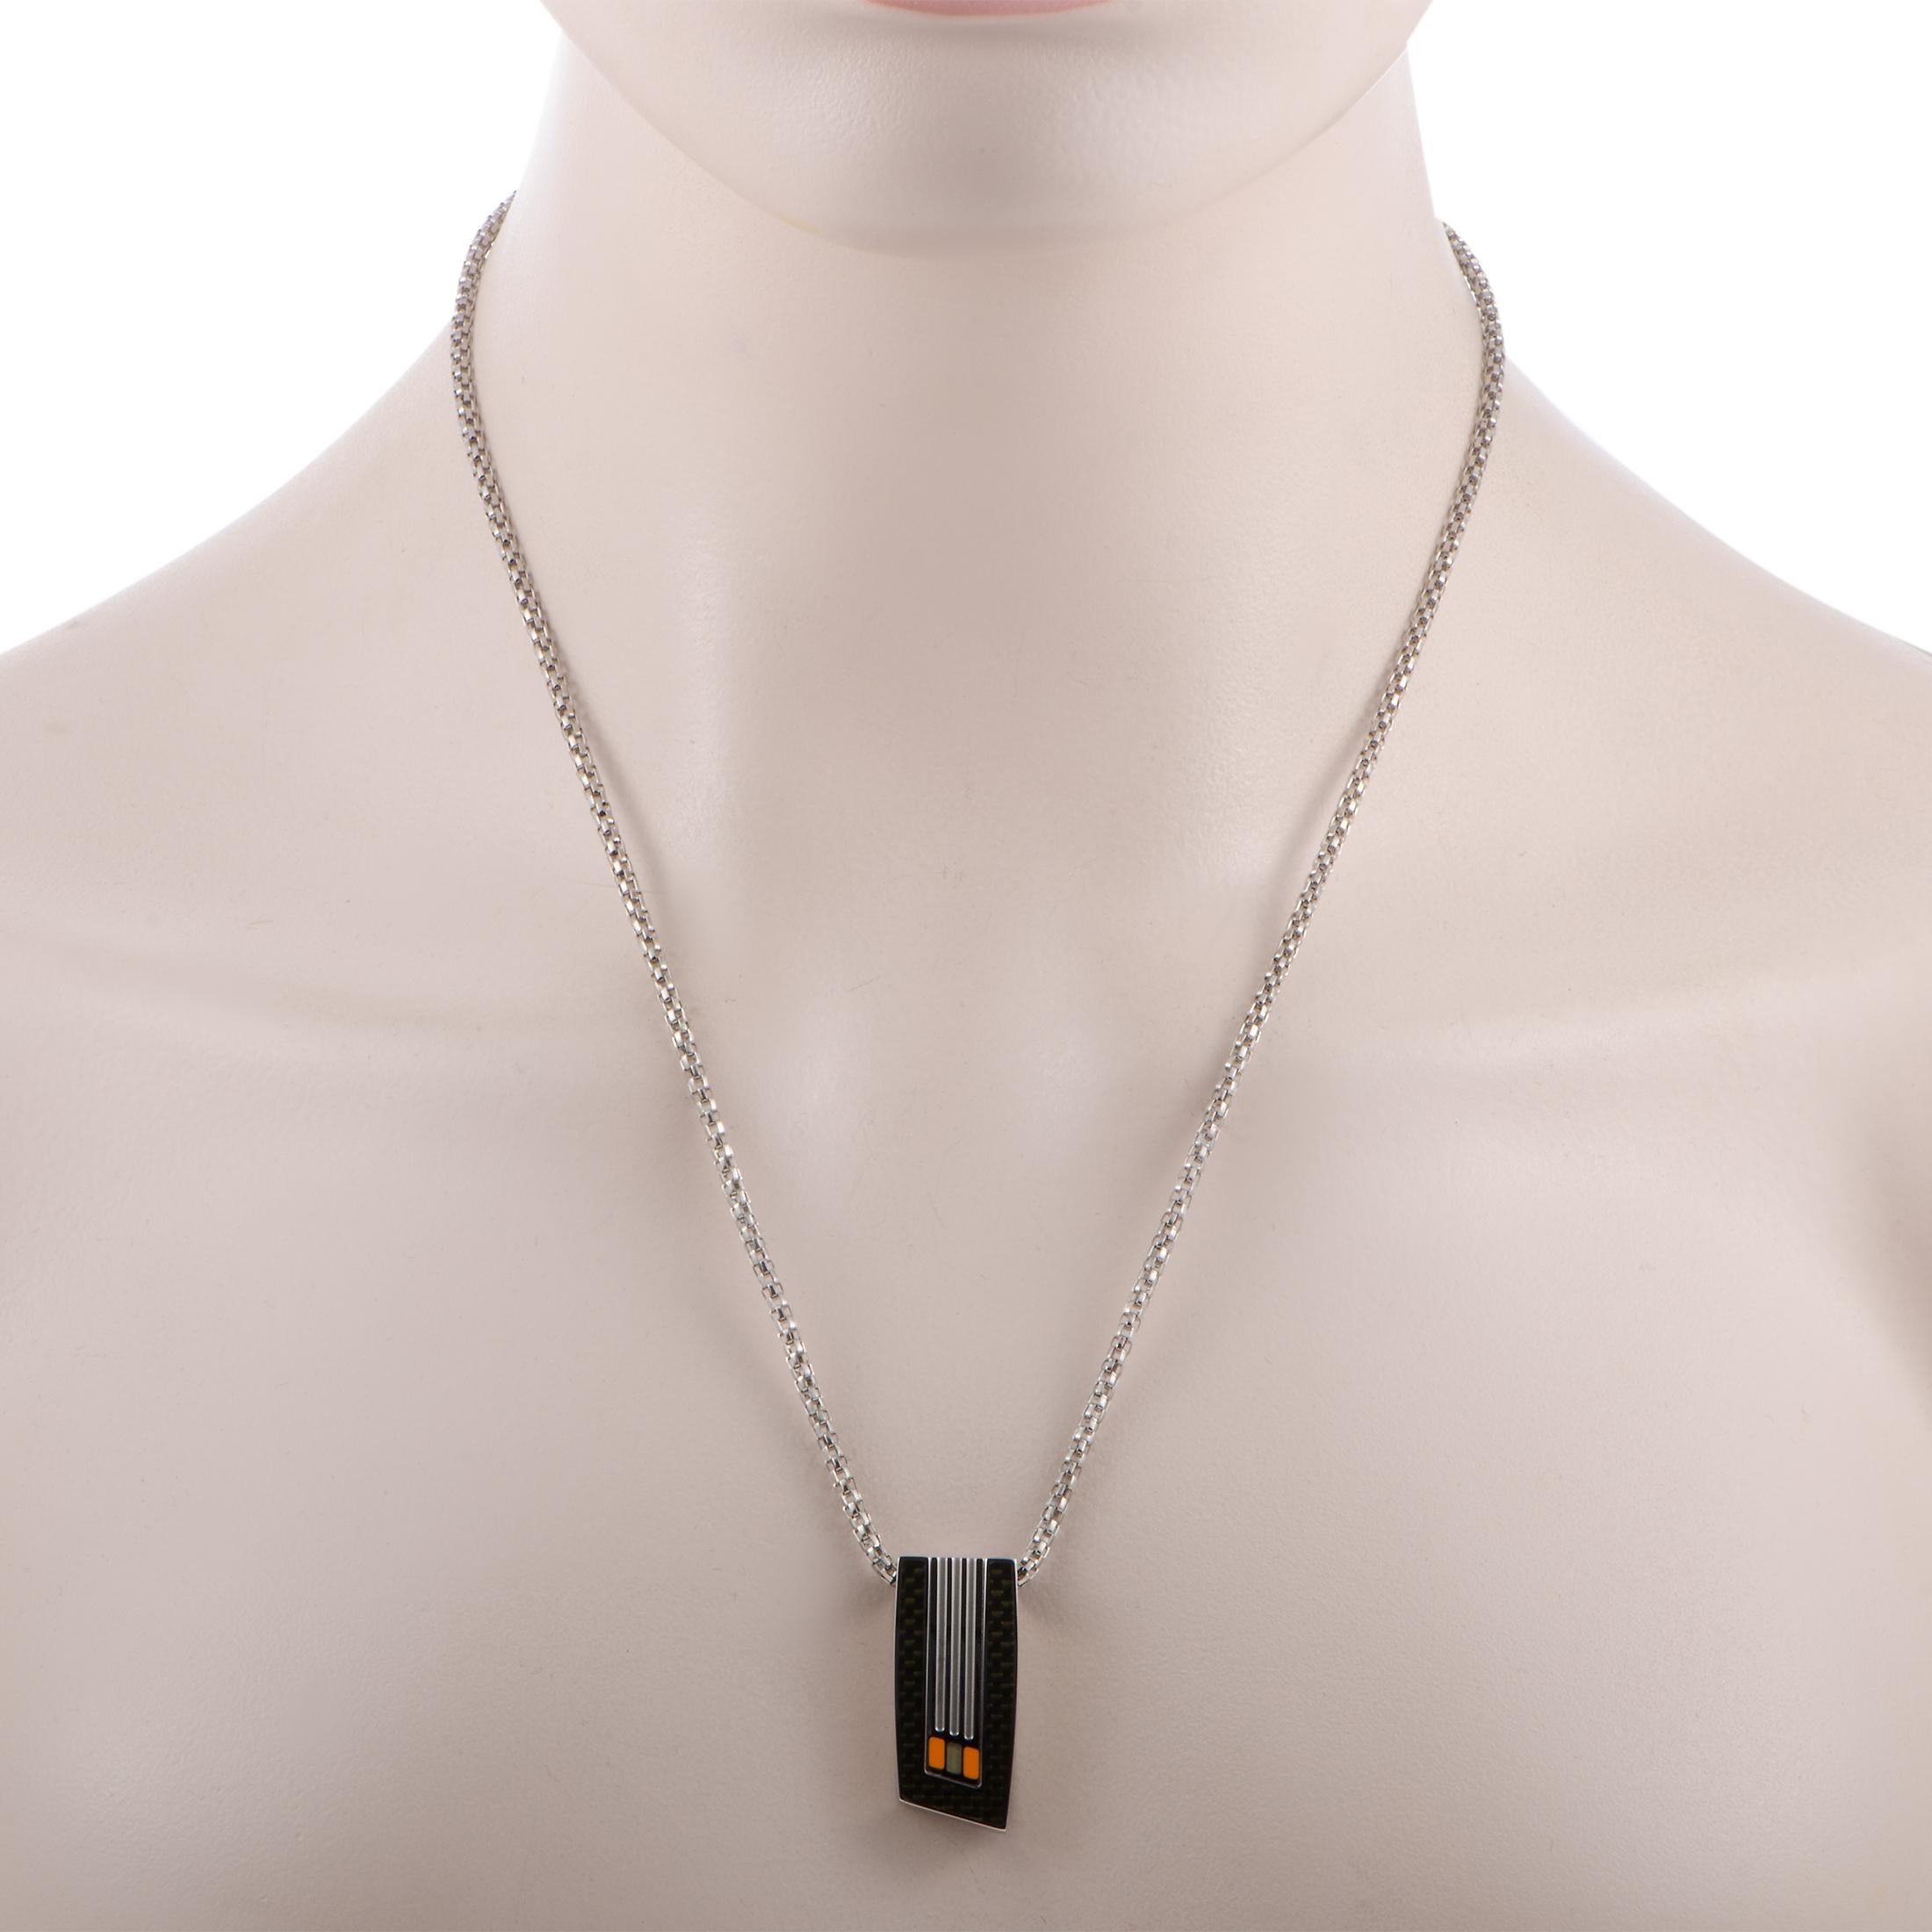 This Tonino Lamborghini necklace is crafted from stainless steel and weighs 23 grams. The necklace is presented with a 20” chain and a pendant that measures 1.25” in length and 0.50” in width.

Offered in brand new condition, this item includes the